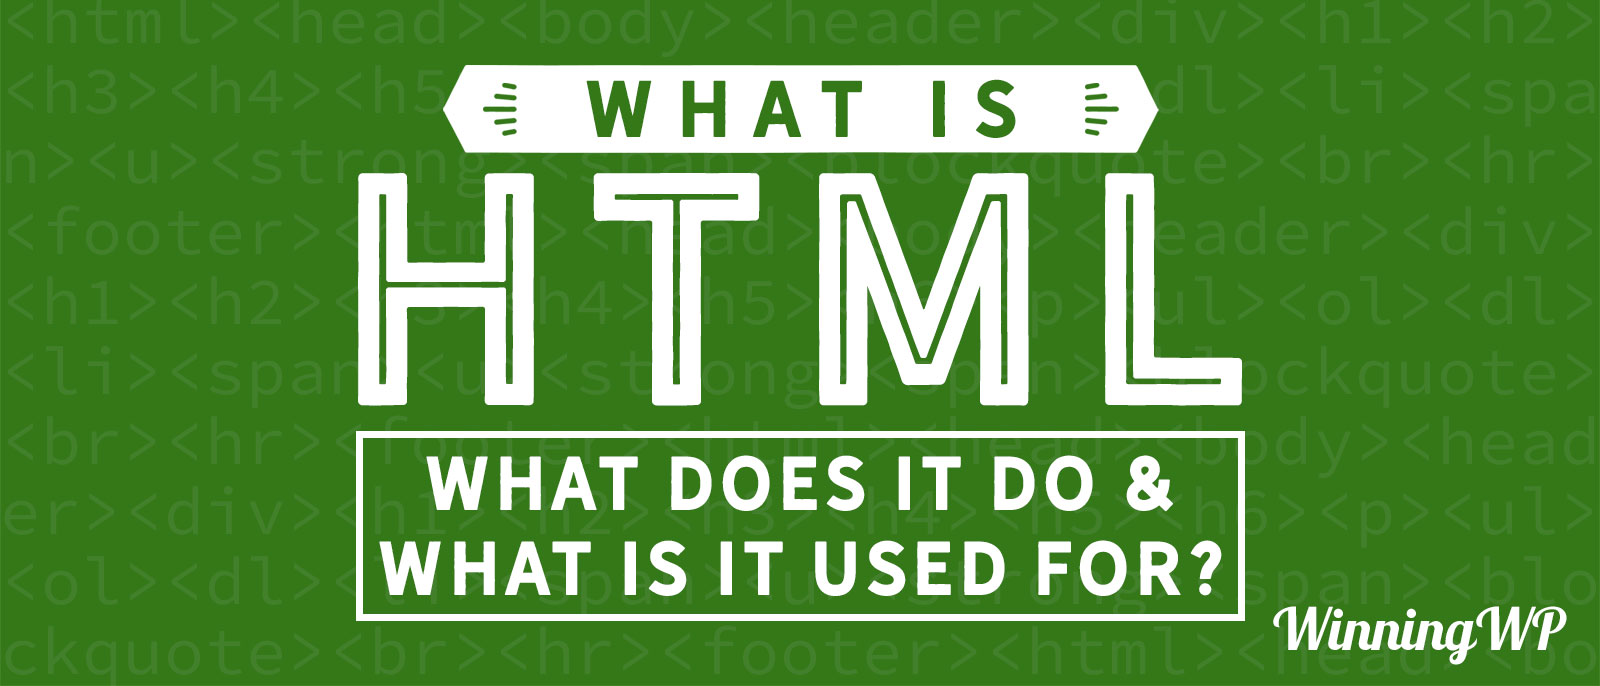 What is HTML